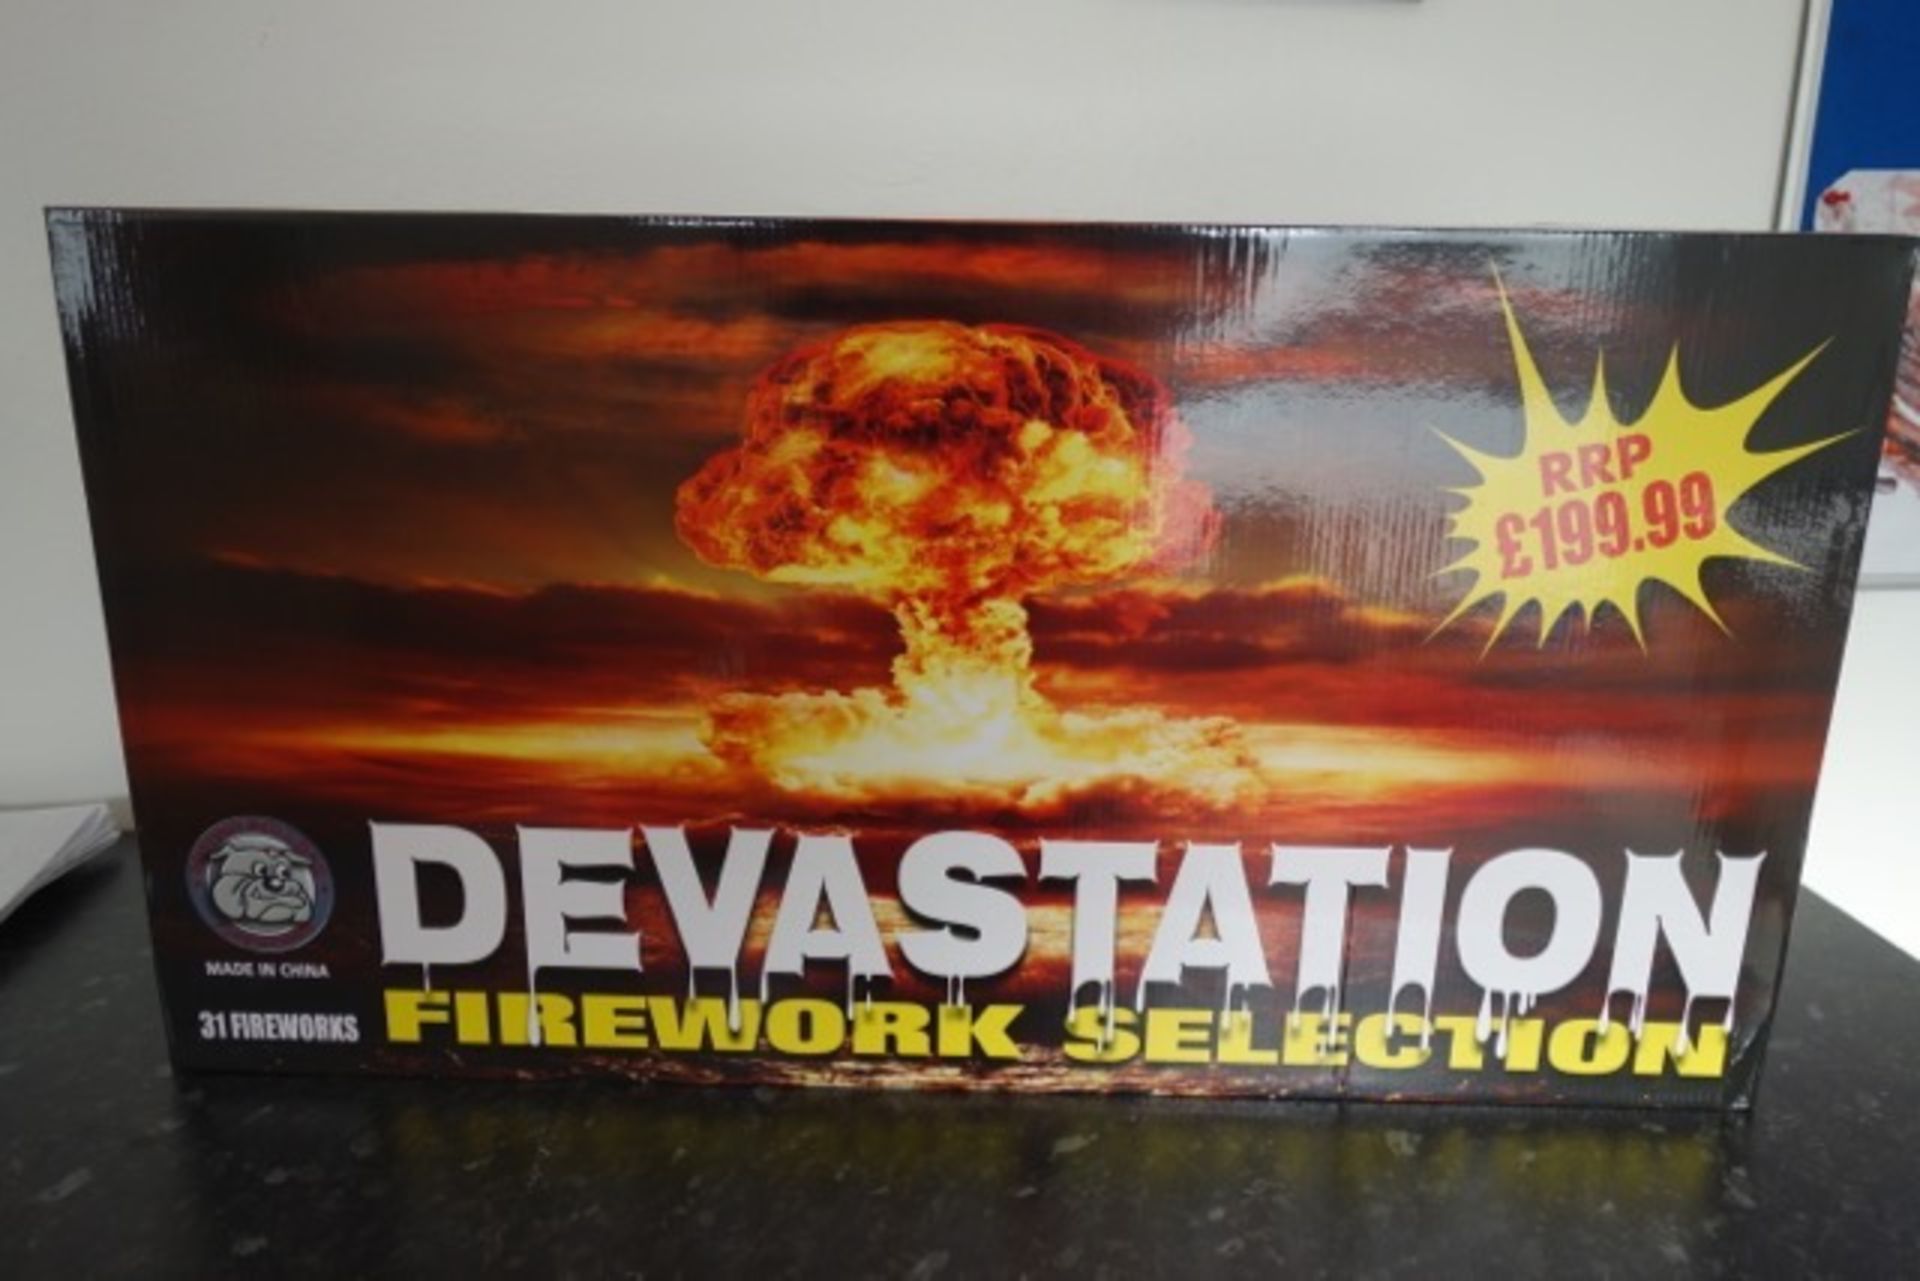 1 x DEVASTATION ULTIMATE SELECTION BOX BY BRITISH BULLDOG FIREWORK COMPANY - THIS YEARS NEW LOOK - Image 3 of 3